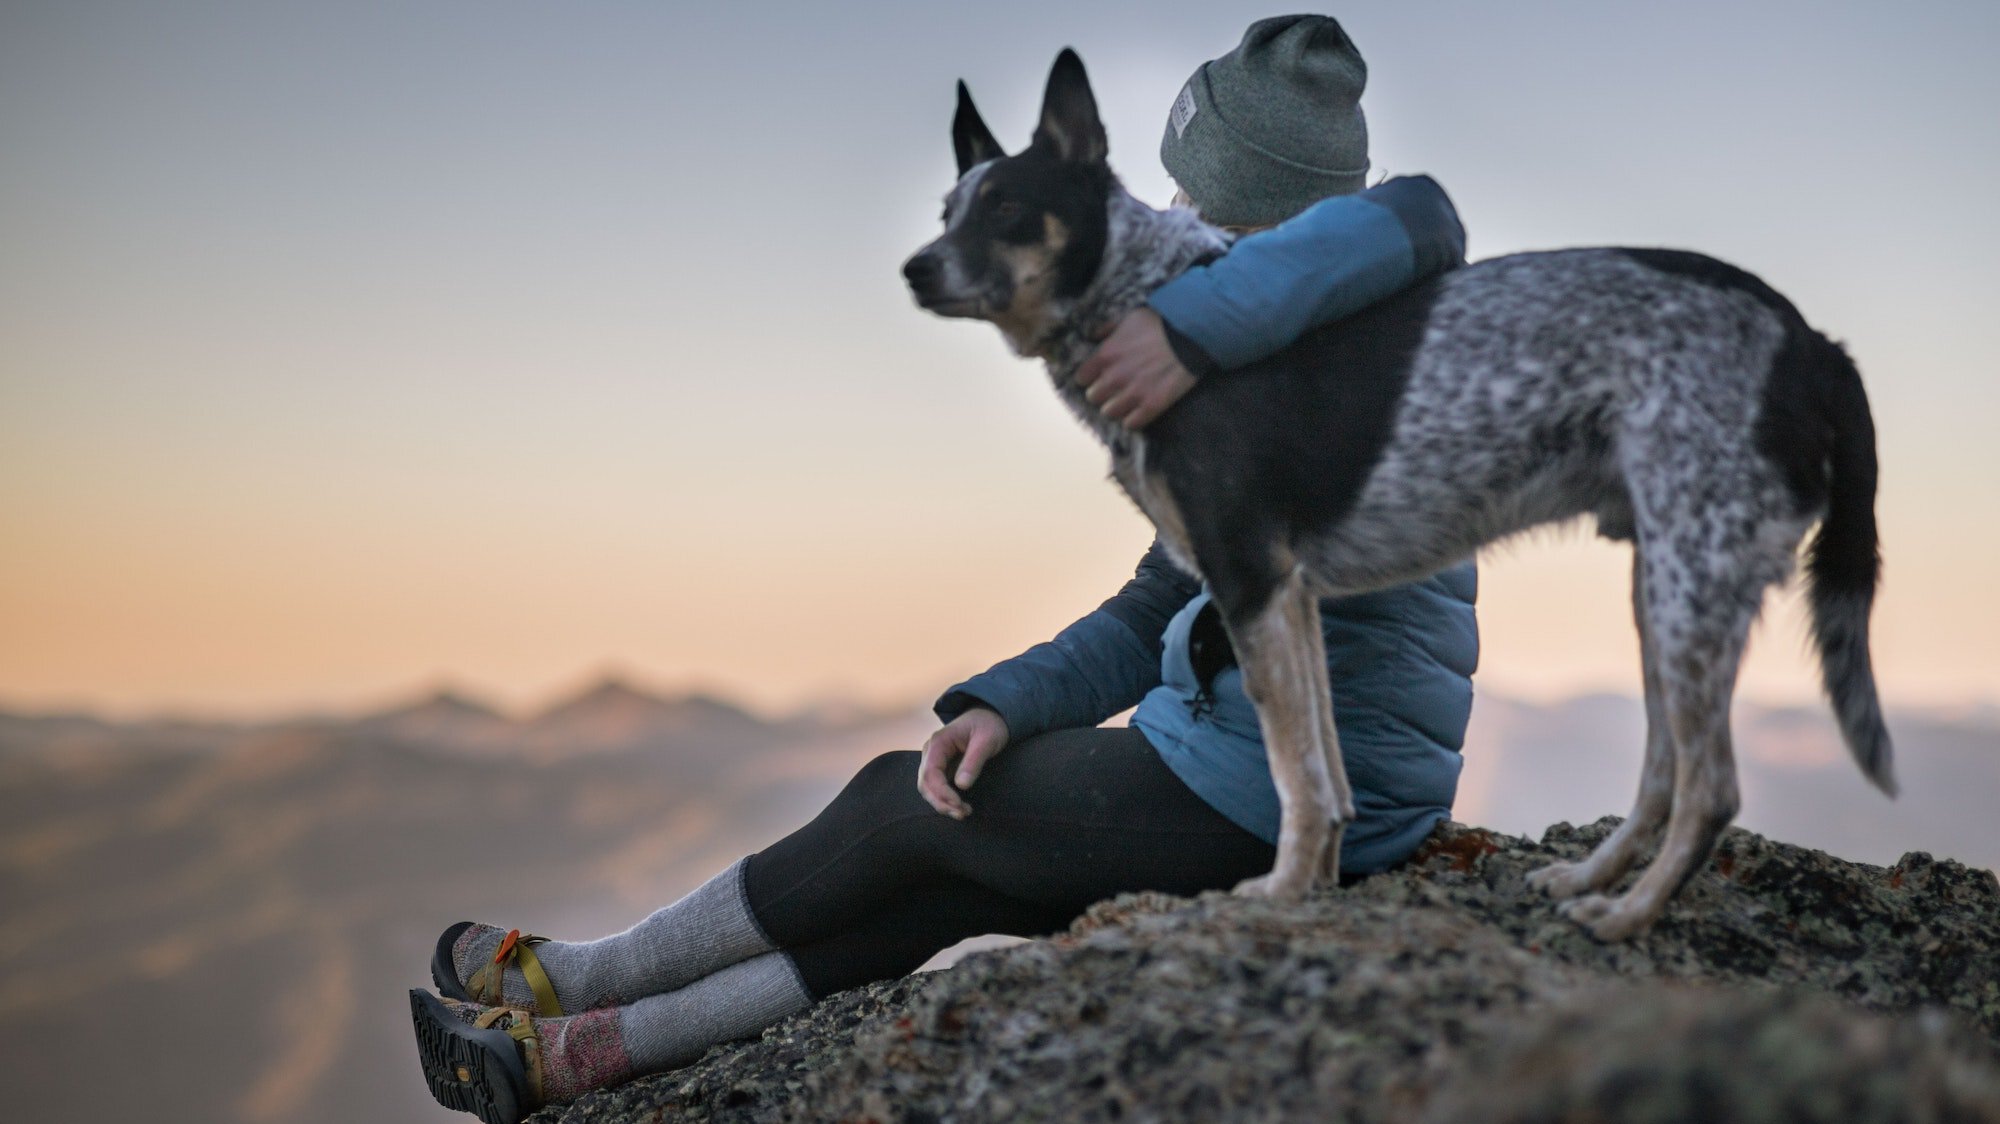 Woman with an arm over her dog enjoying mountain views